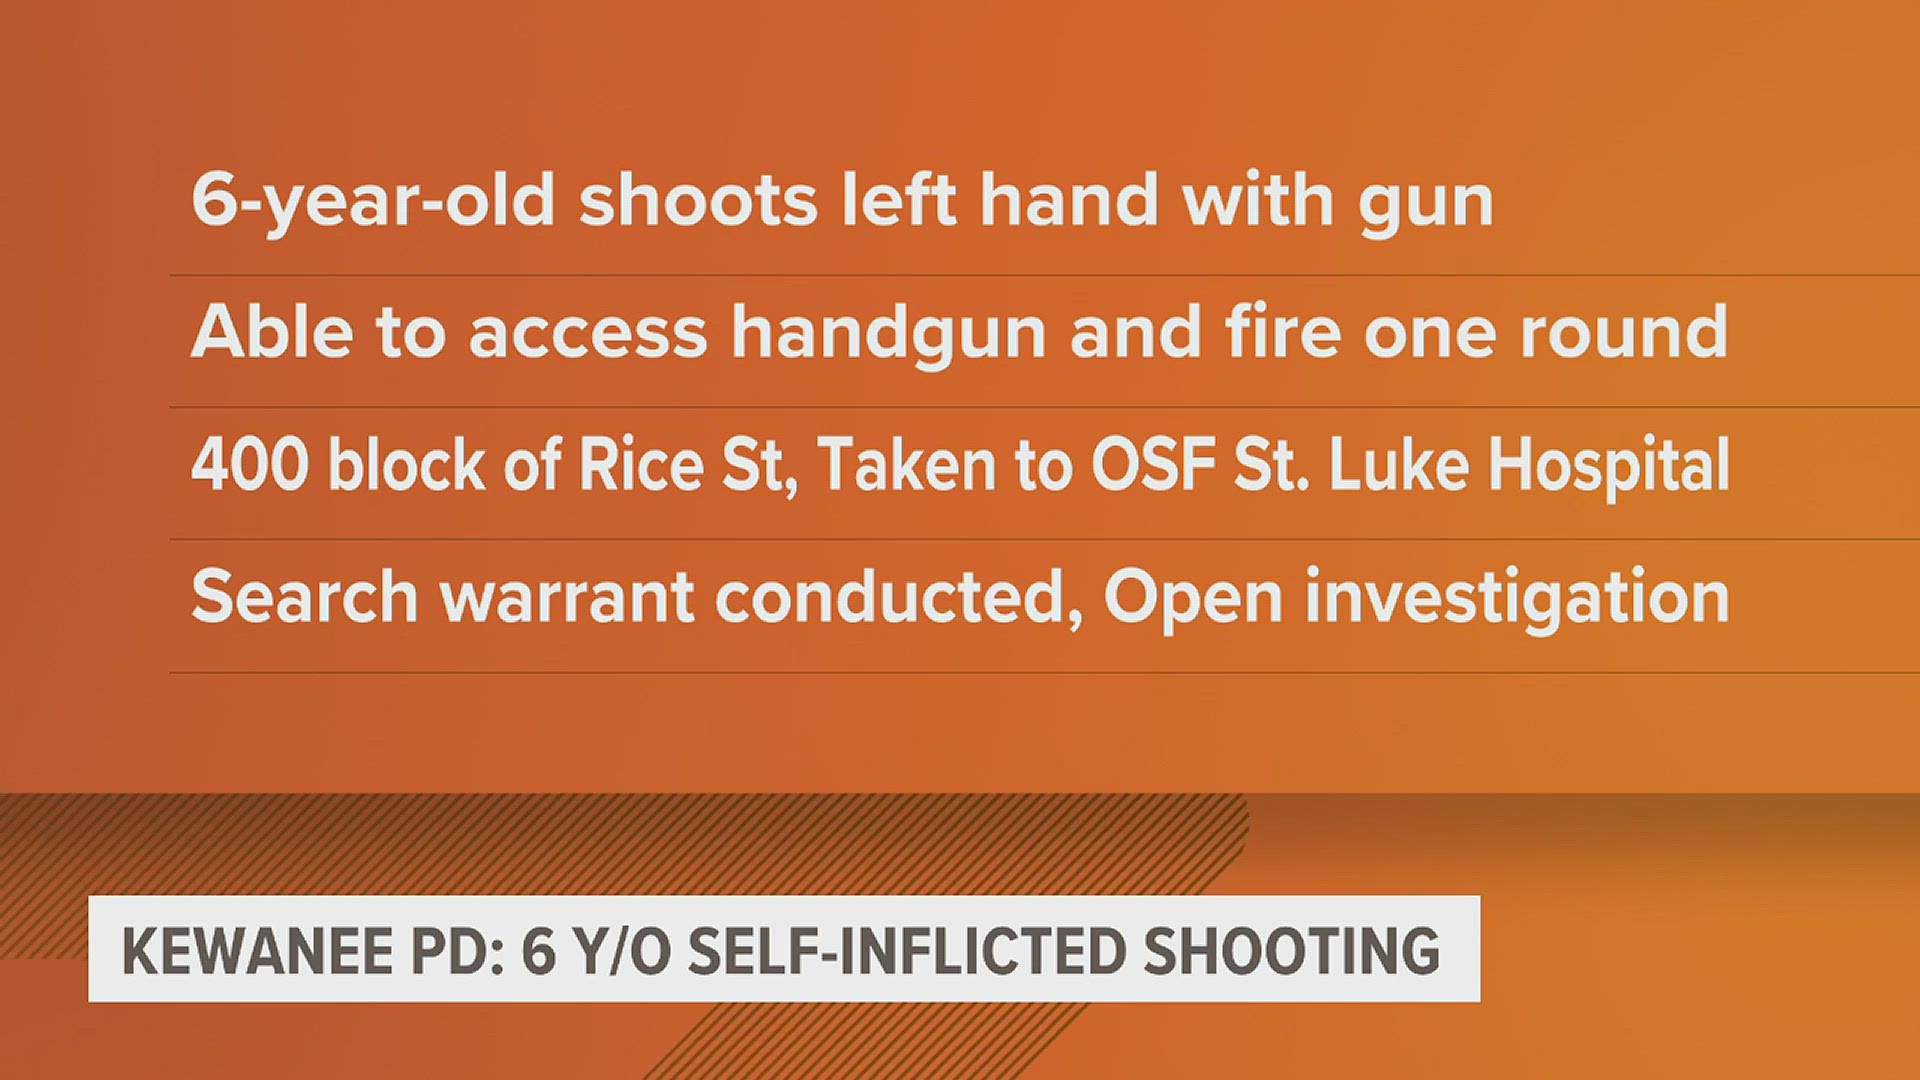 A 6-year-old child is in the hospital after obtaining a gun, resulting in a gunshot wound to their hand. Kewanee police are still investigating the incident.